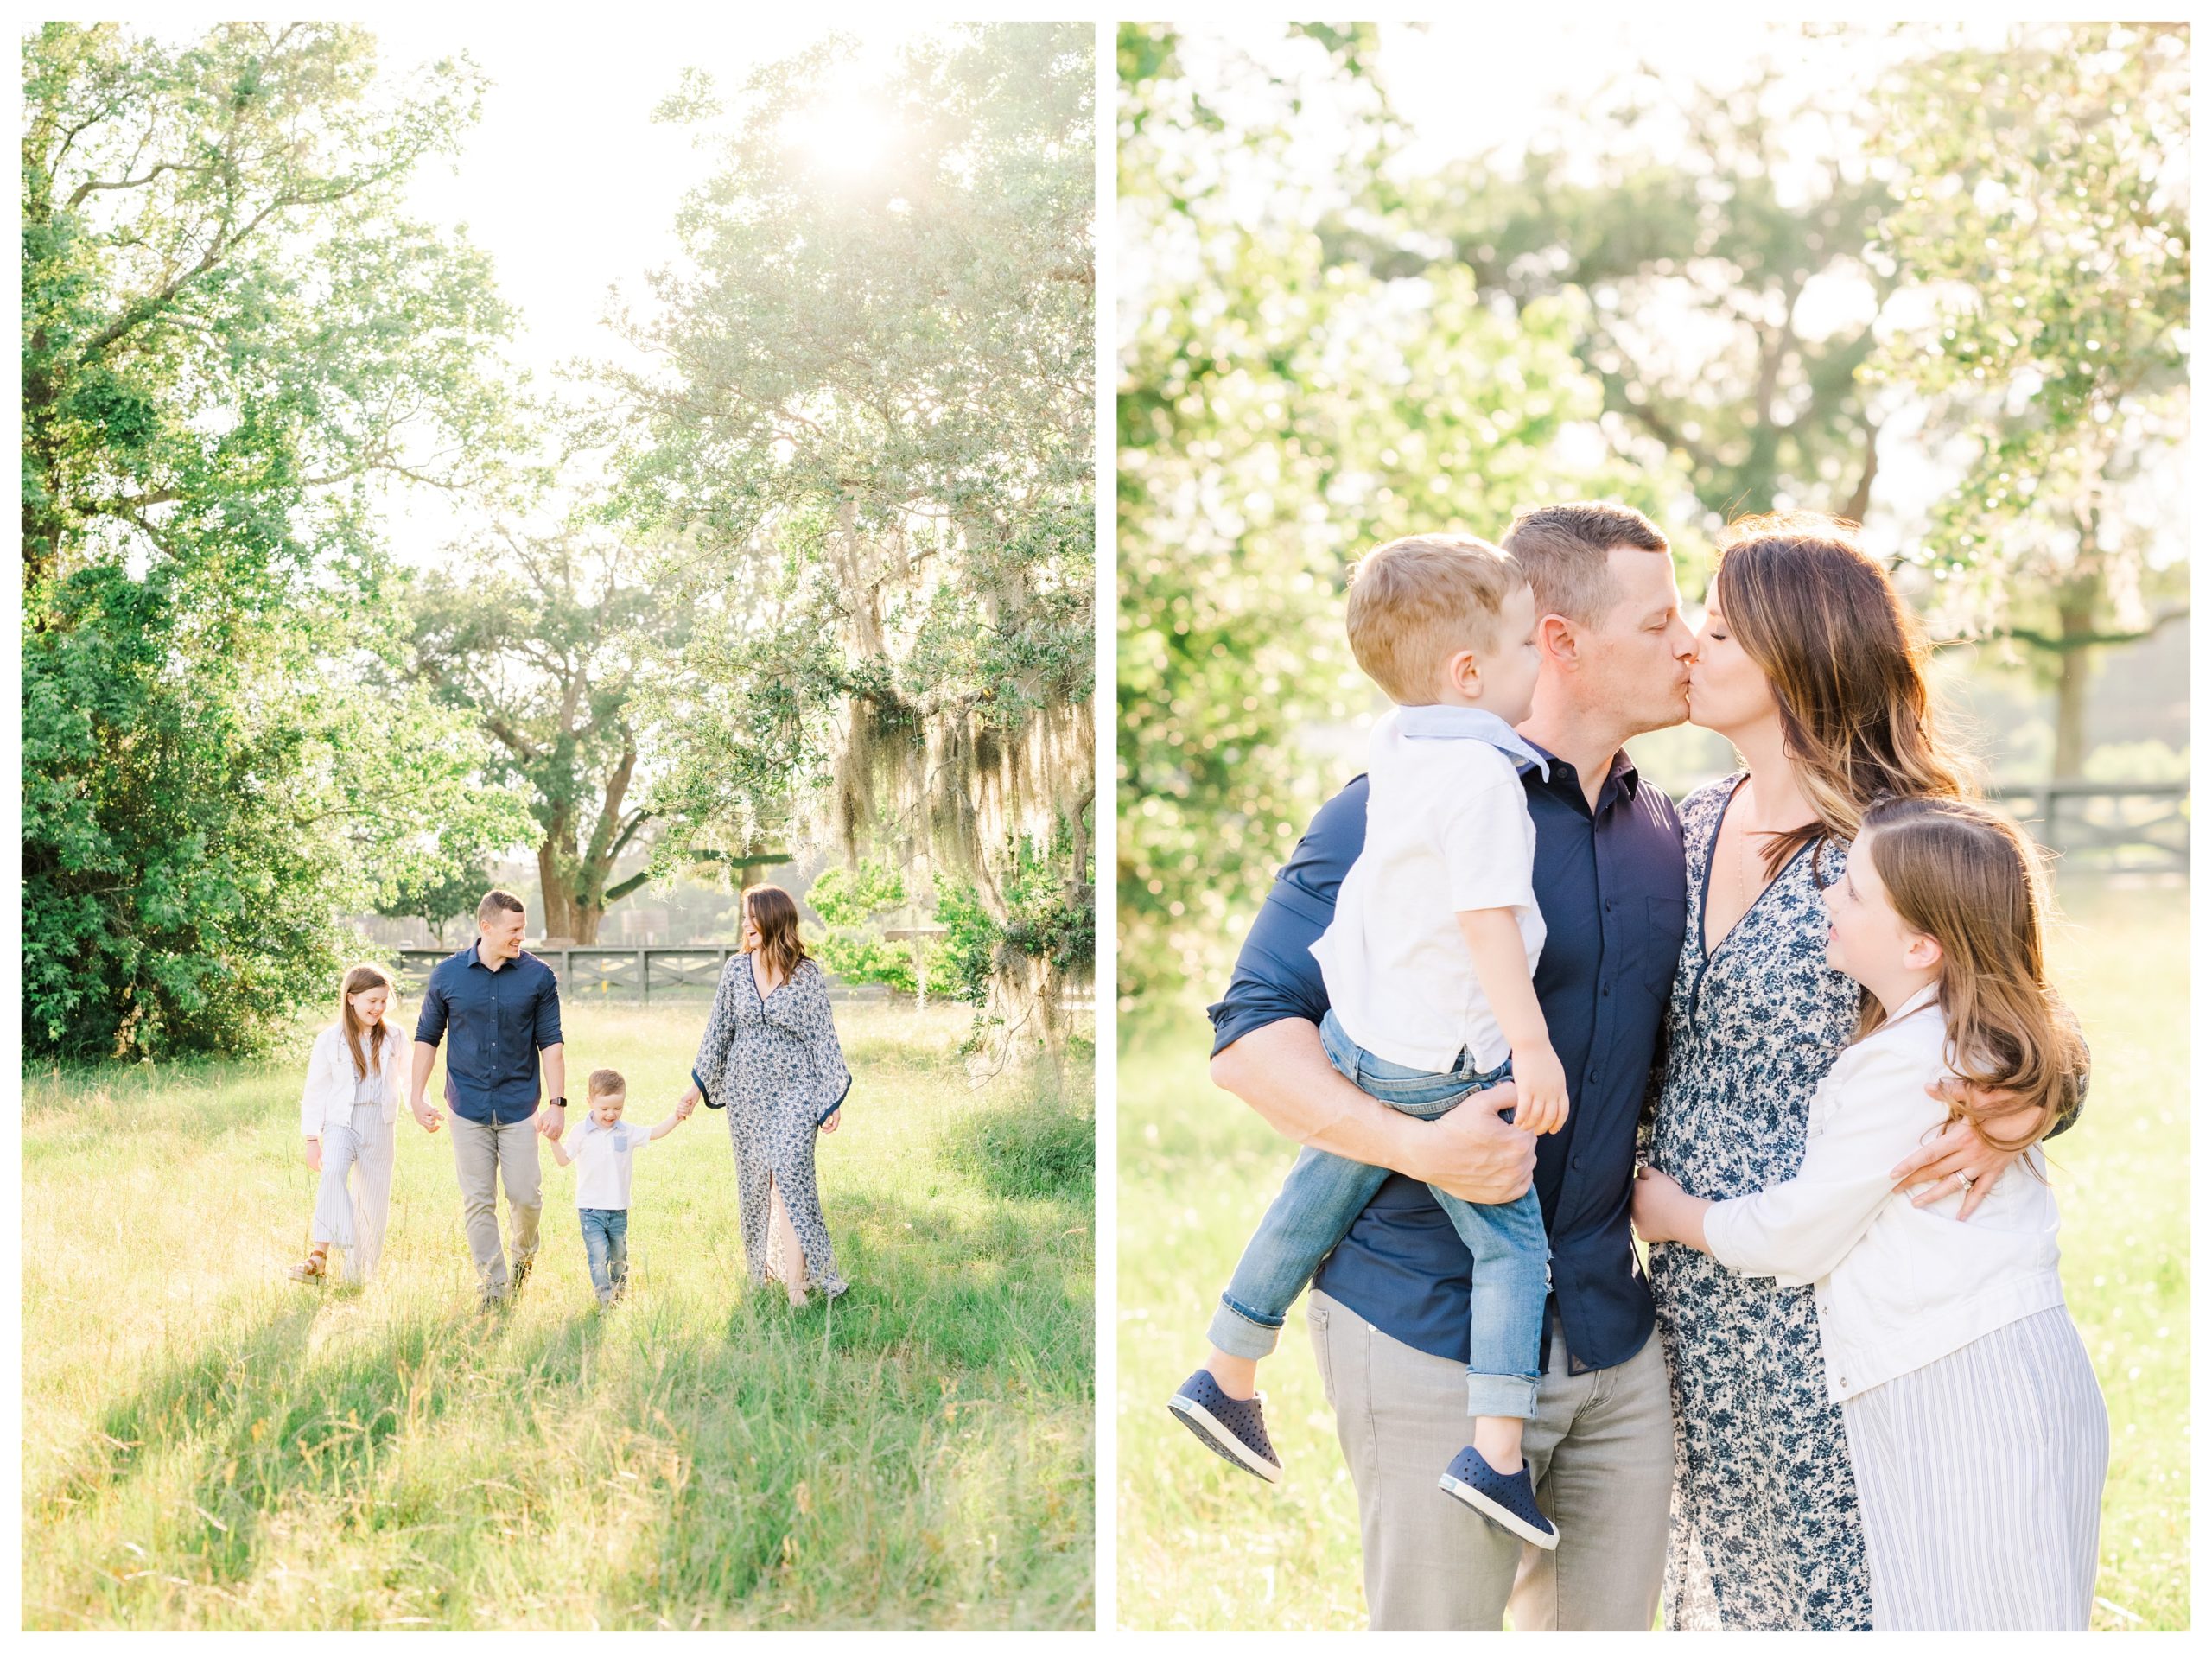 Mossy Oak Tree Photo Sessions The Woodlands Texas